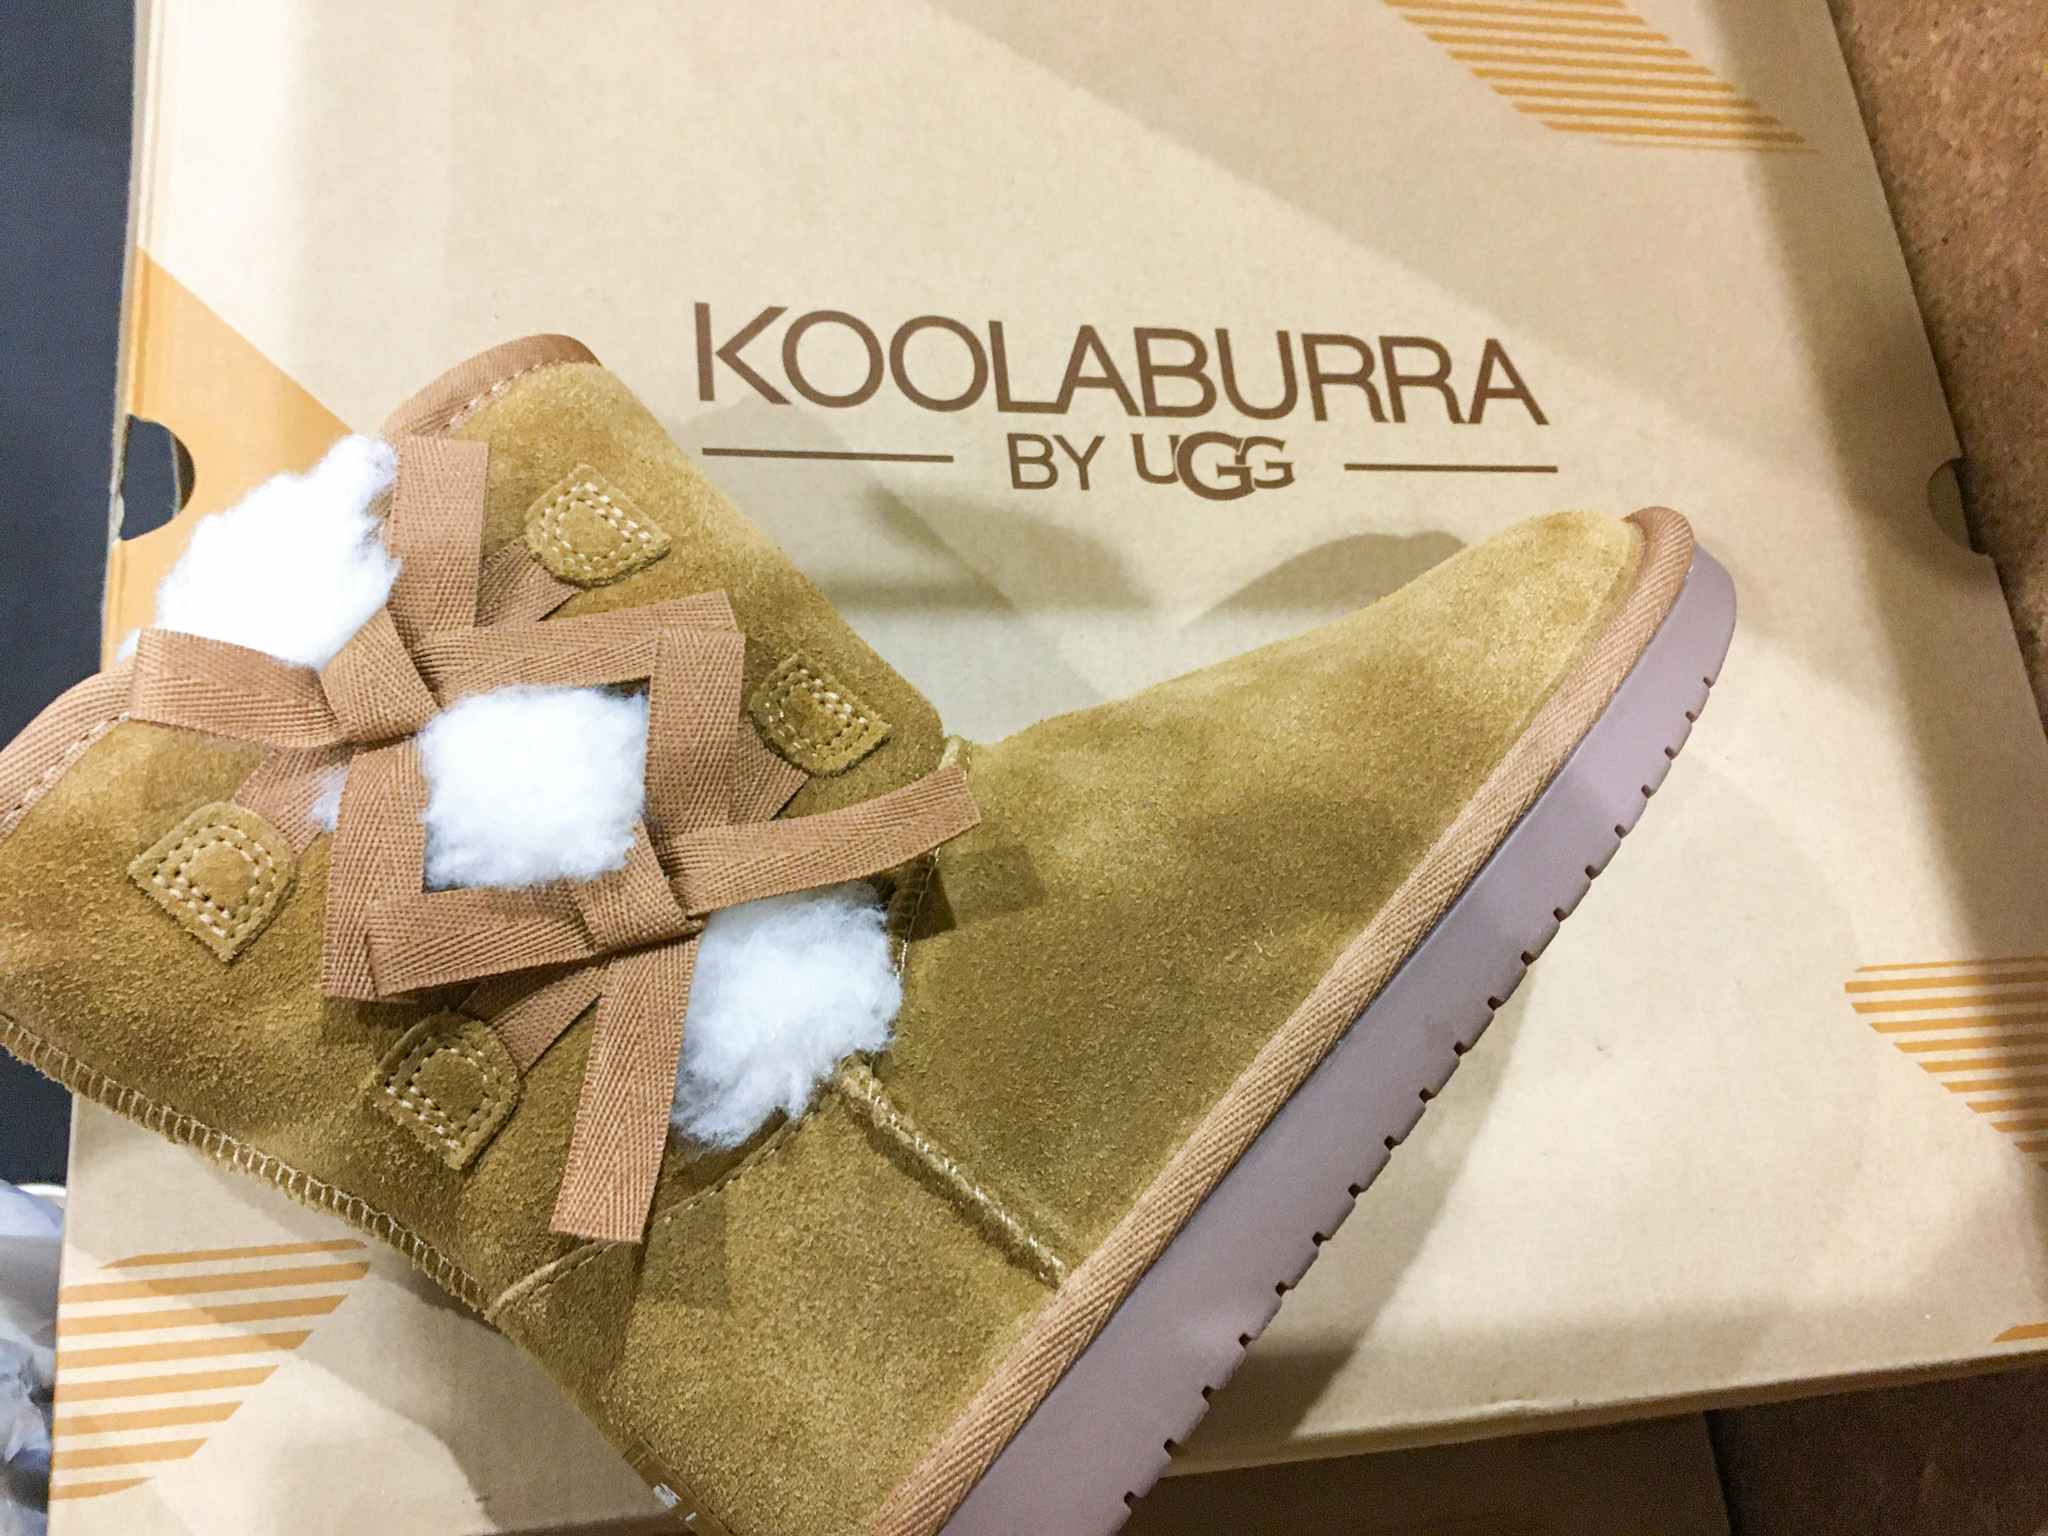 Koolaburra by Ugg 'As Is' Boots, as Low as $21.41 Shipped at QVC